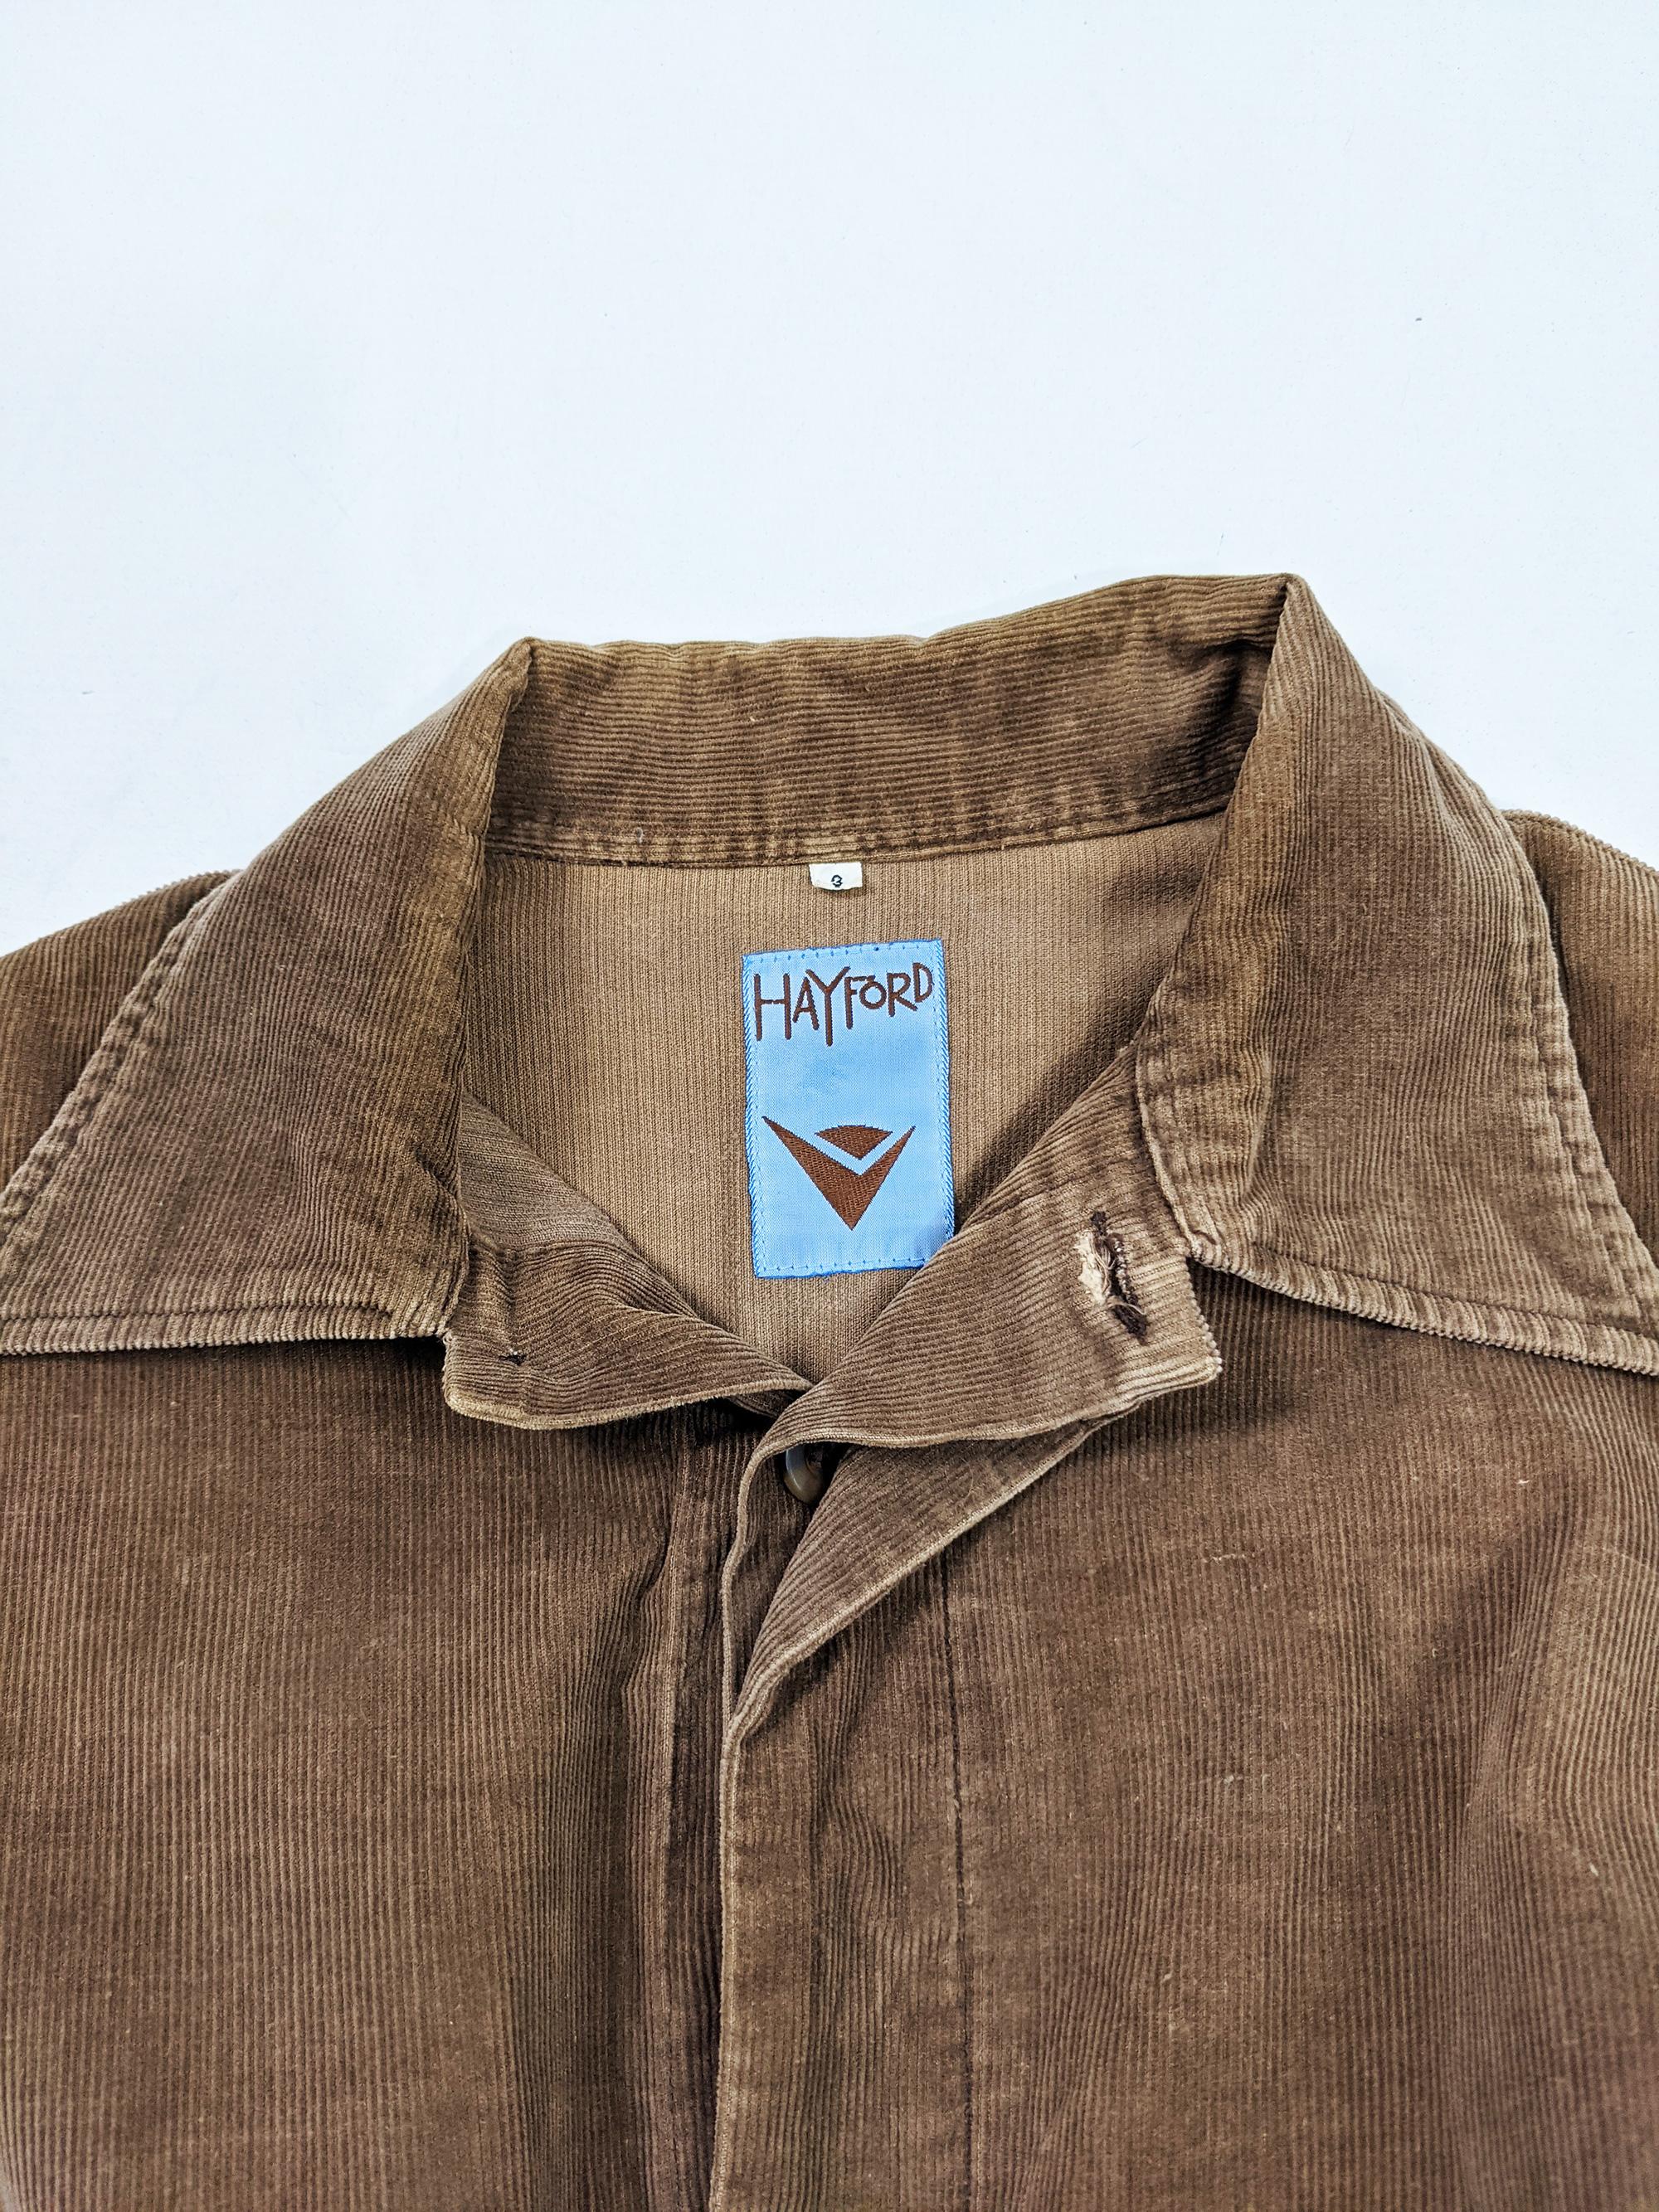 Joe Casely Hayford Vintage Brown Cord Shirt, 1990s For Sale 3